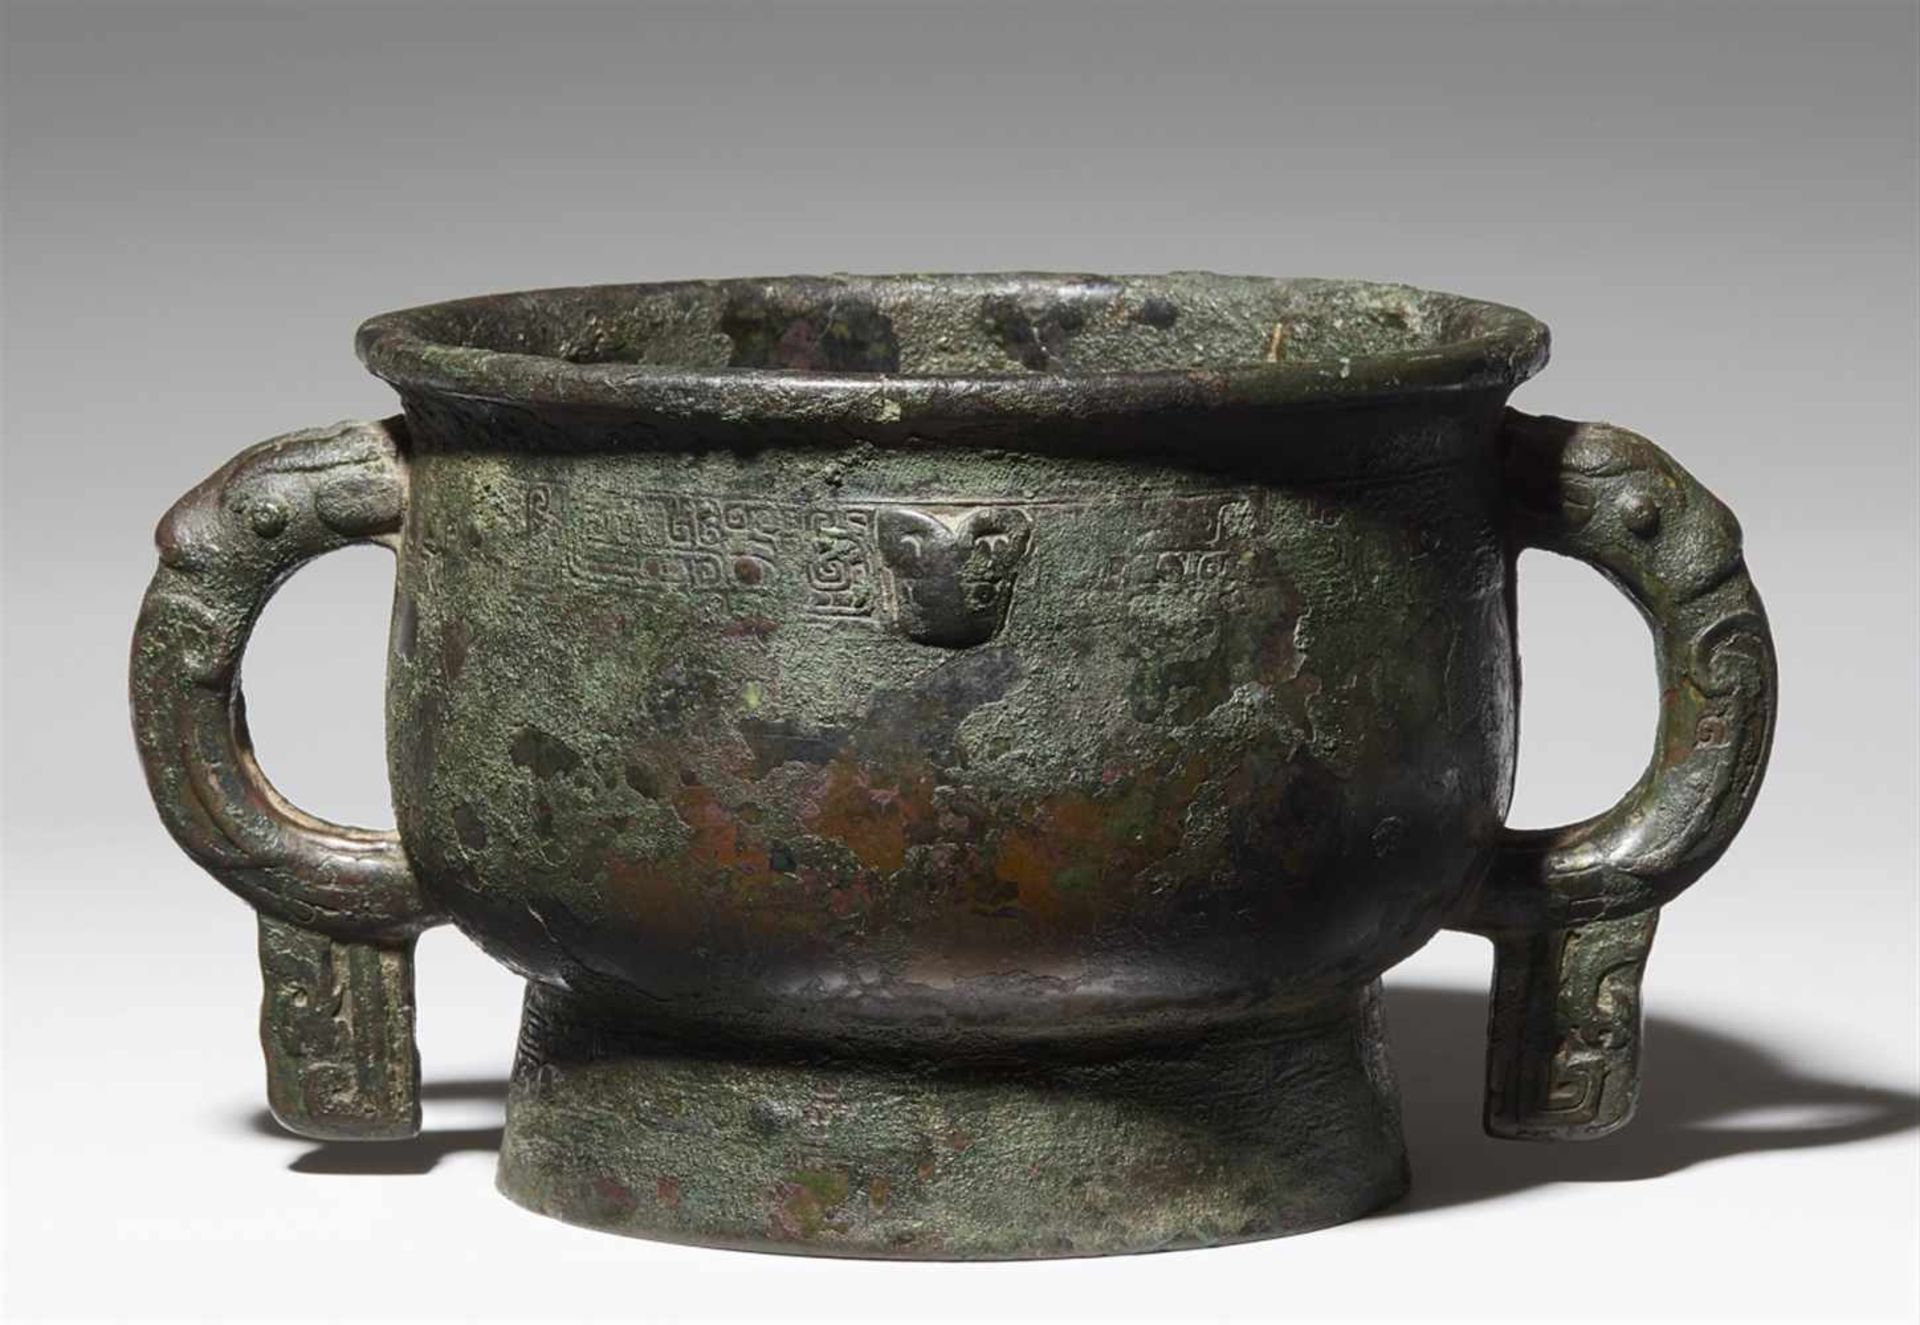 A bronze food vessel of gui type. Early Zhou dynasty, 12th/10th century BC